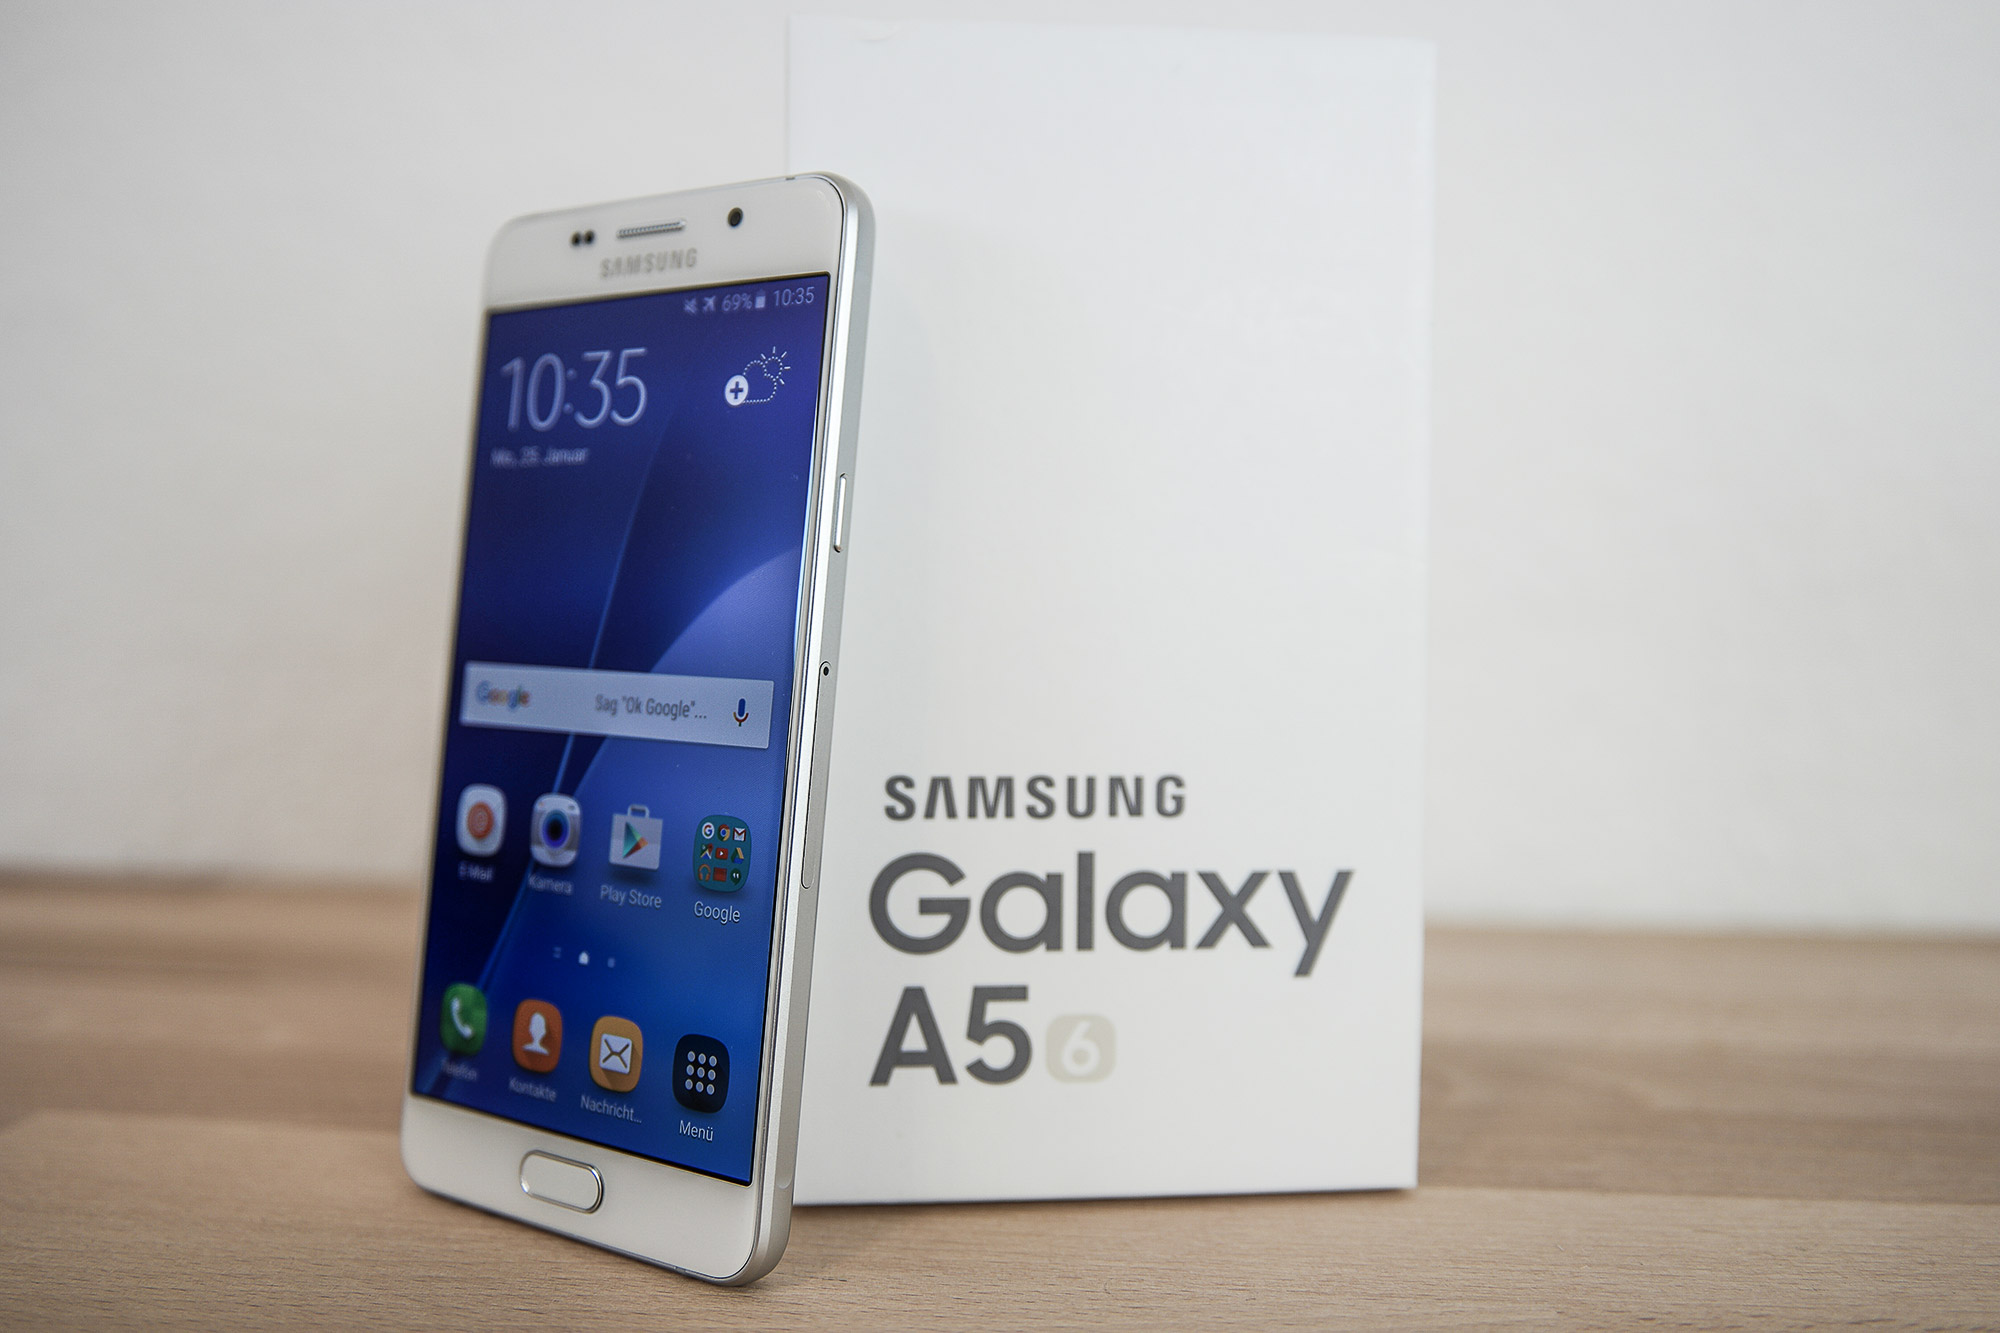 Samsung Galaxy A5 2016 Archives - All About Samsung